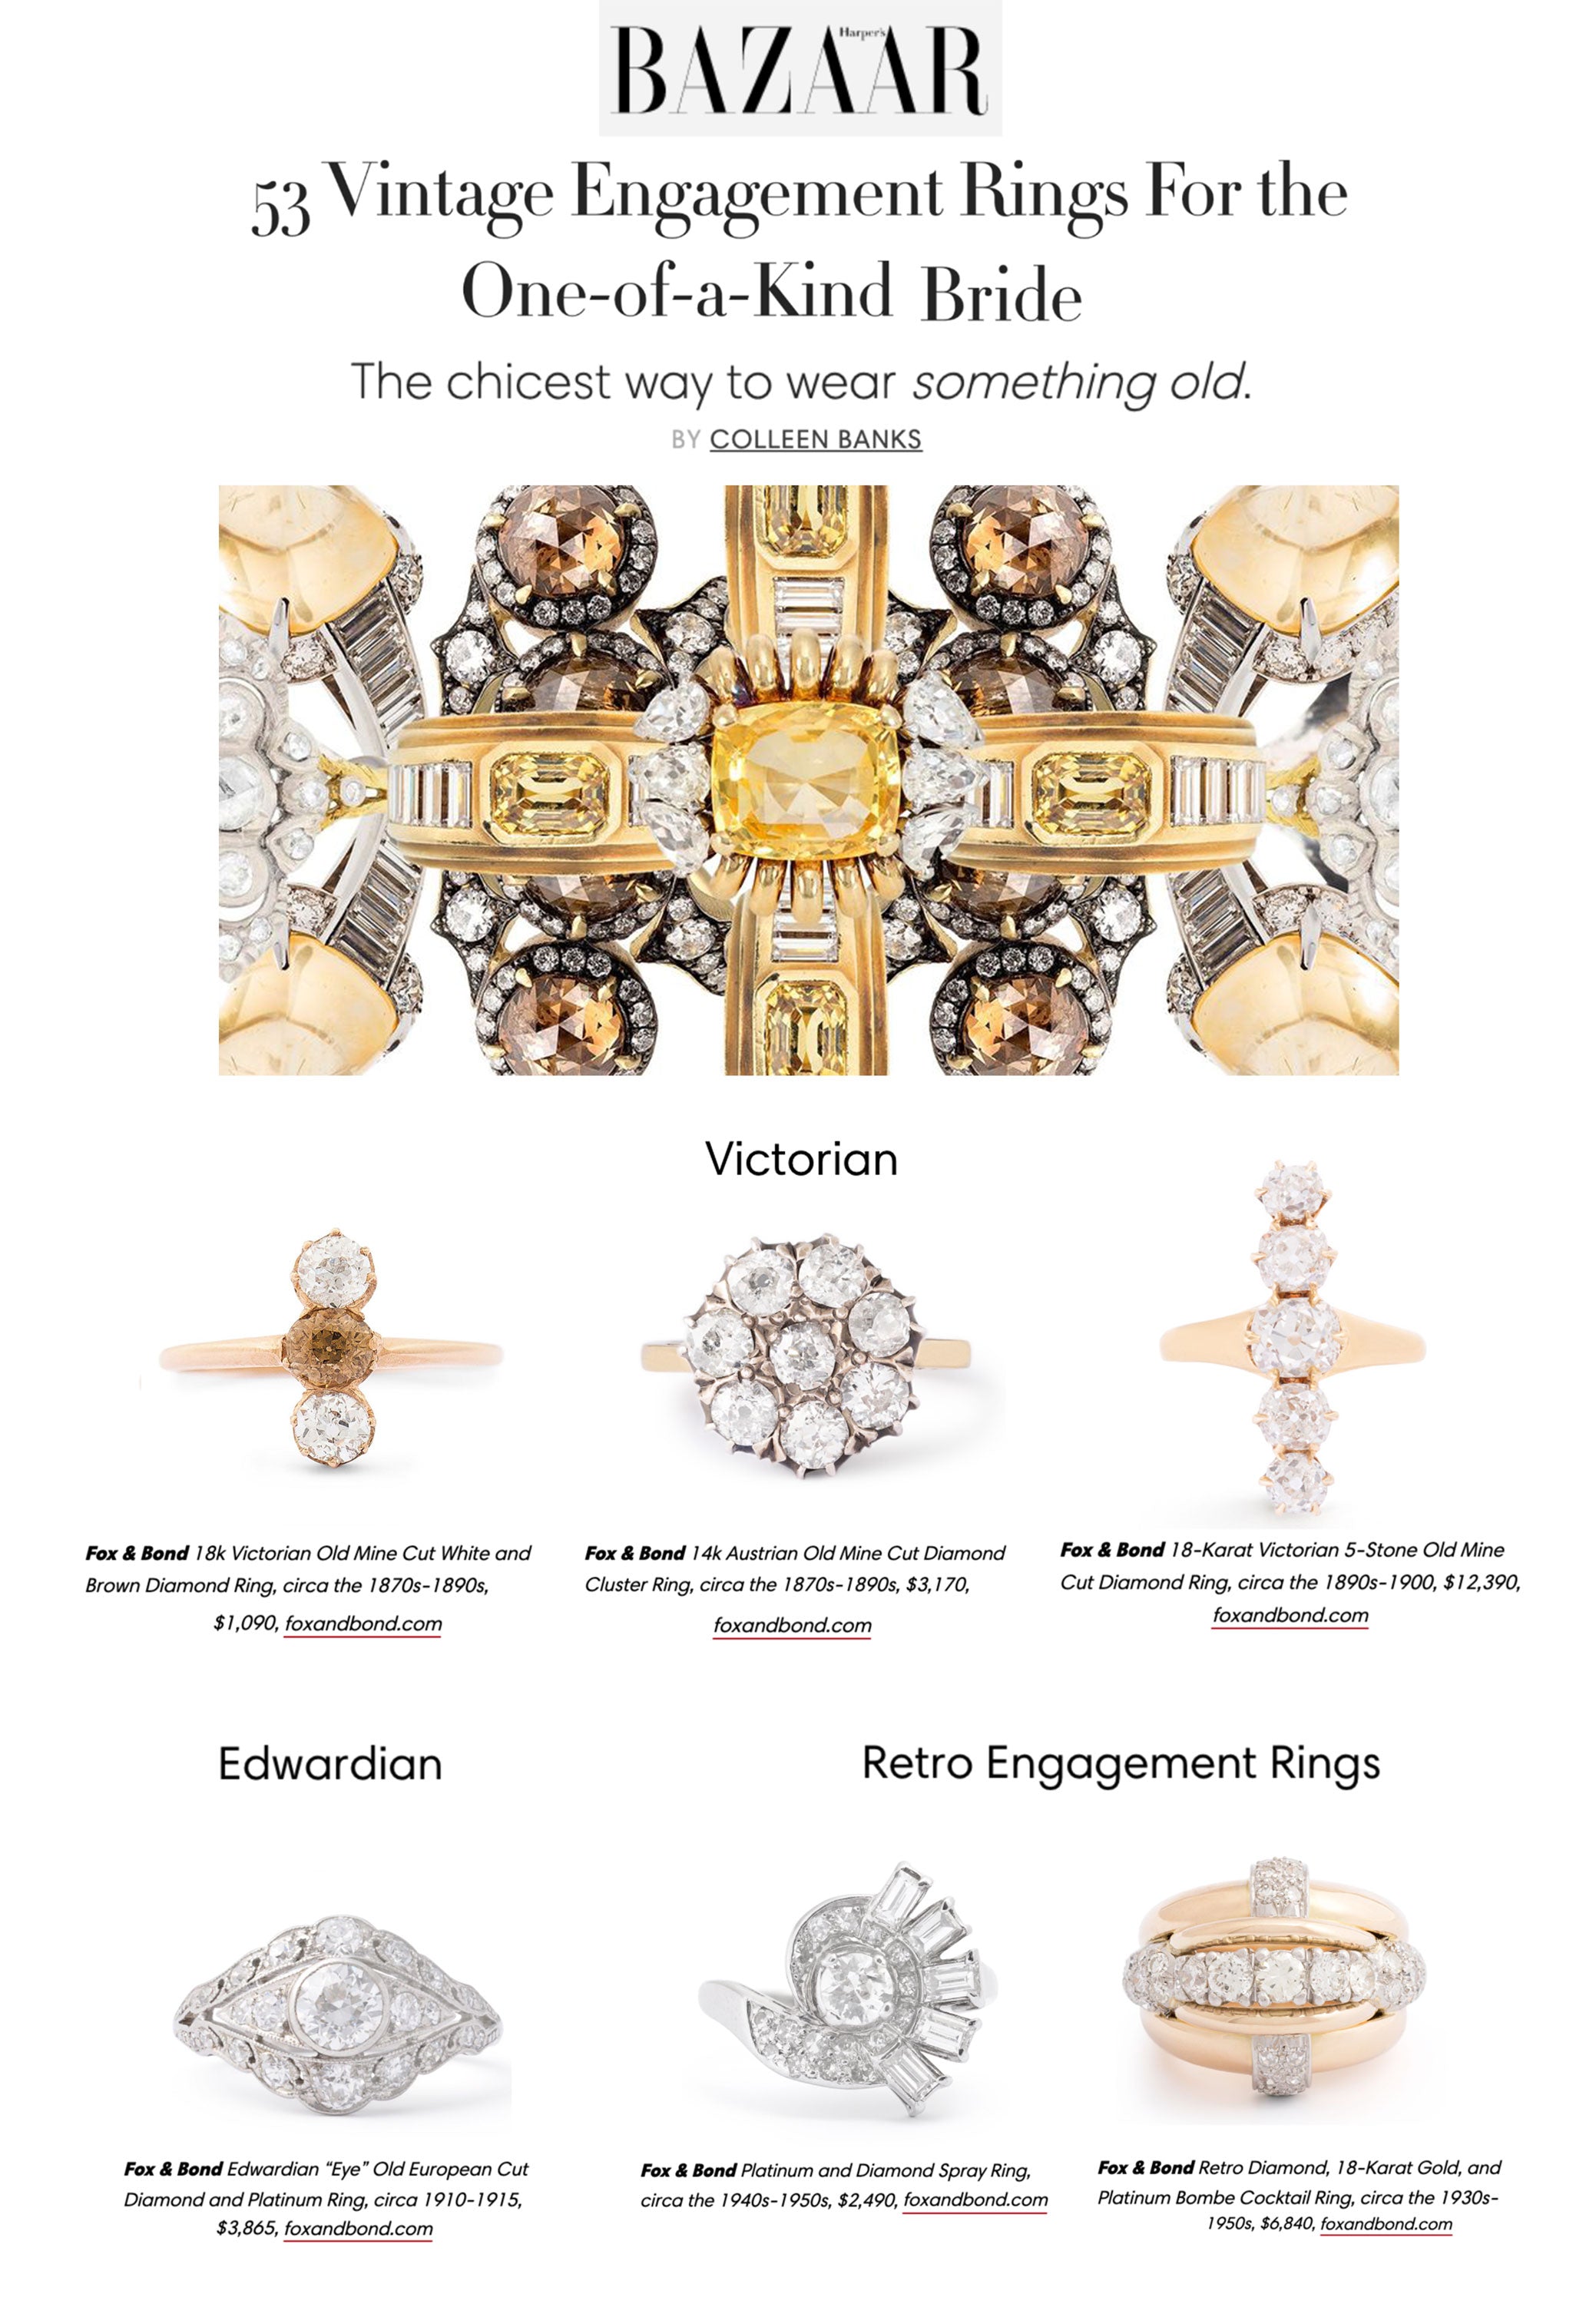 Harpers Bazaar: 53 Vintage Engagement Rings For the One-of-a-Kind Bride